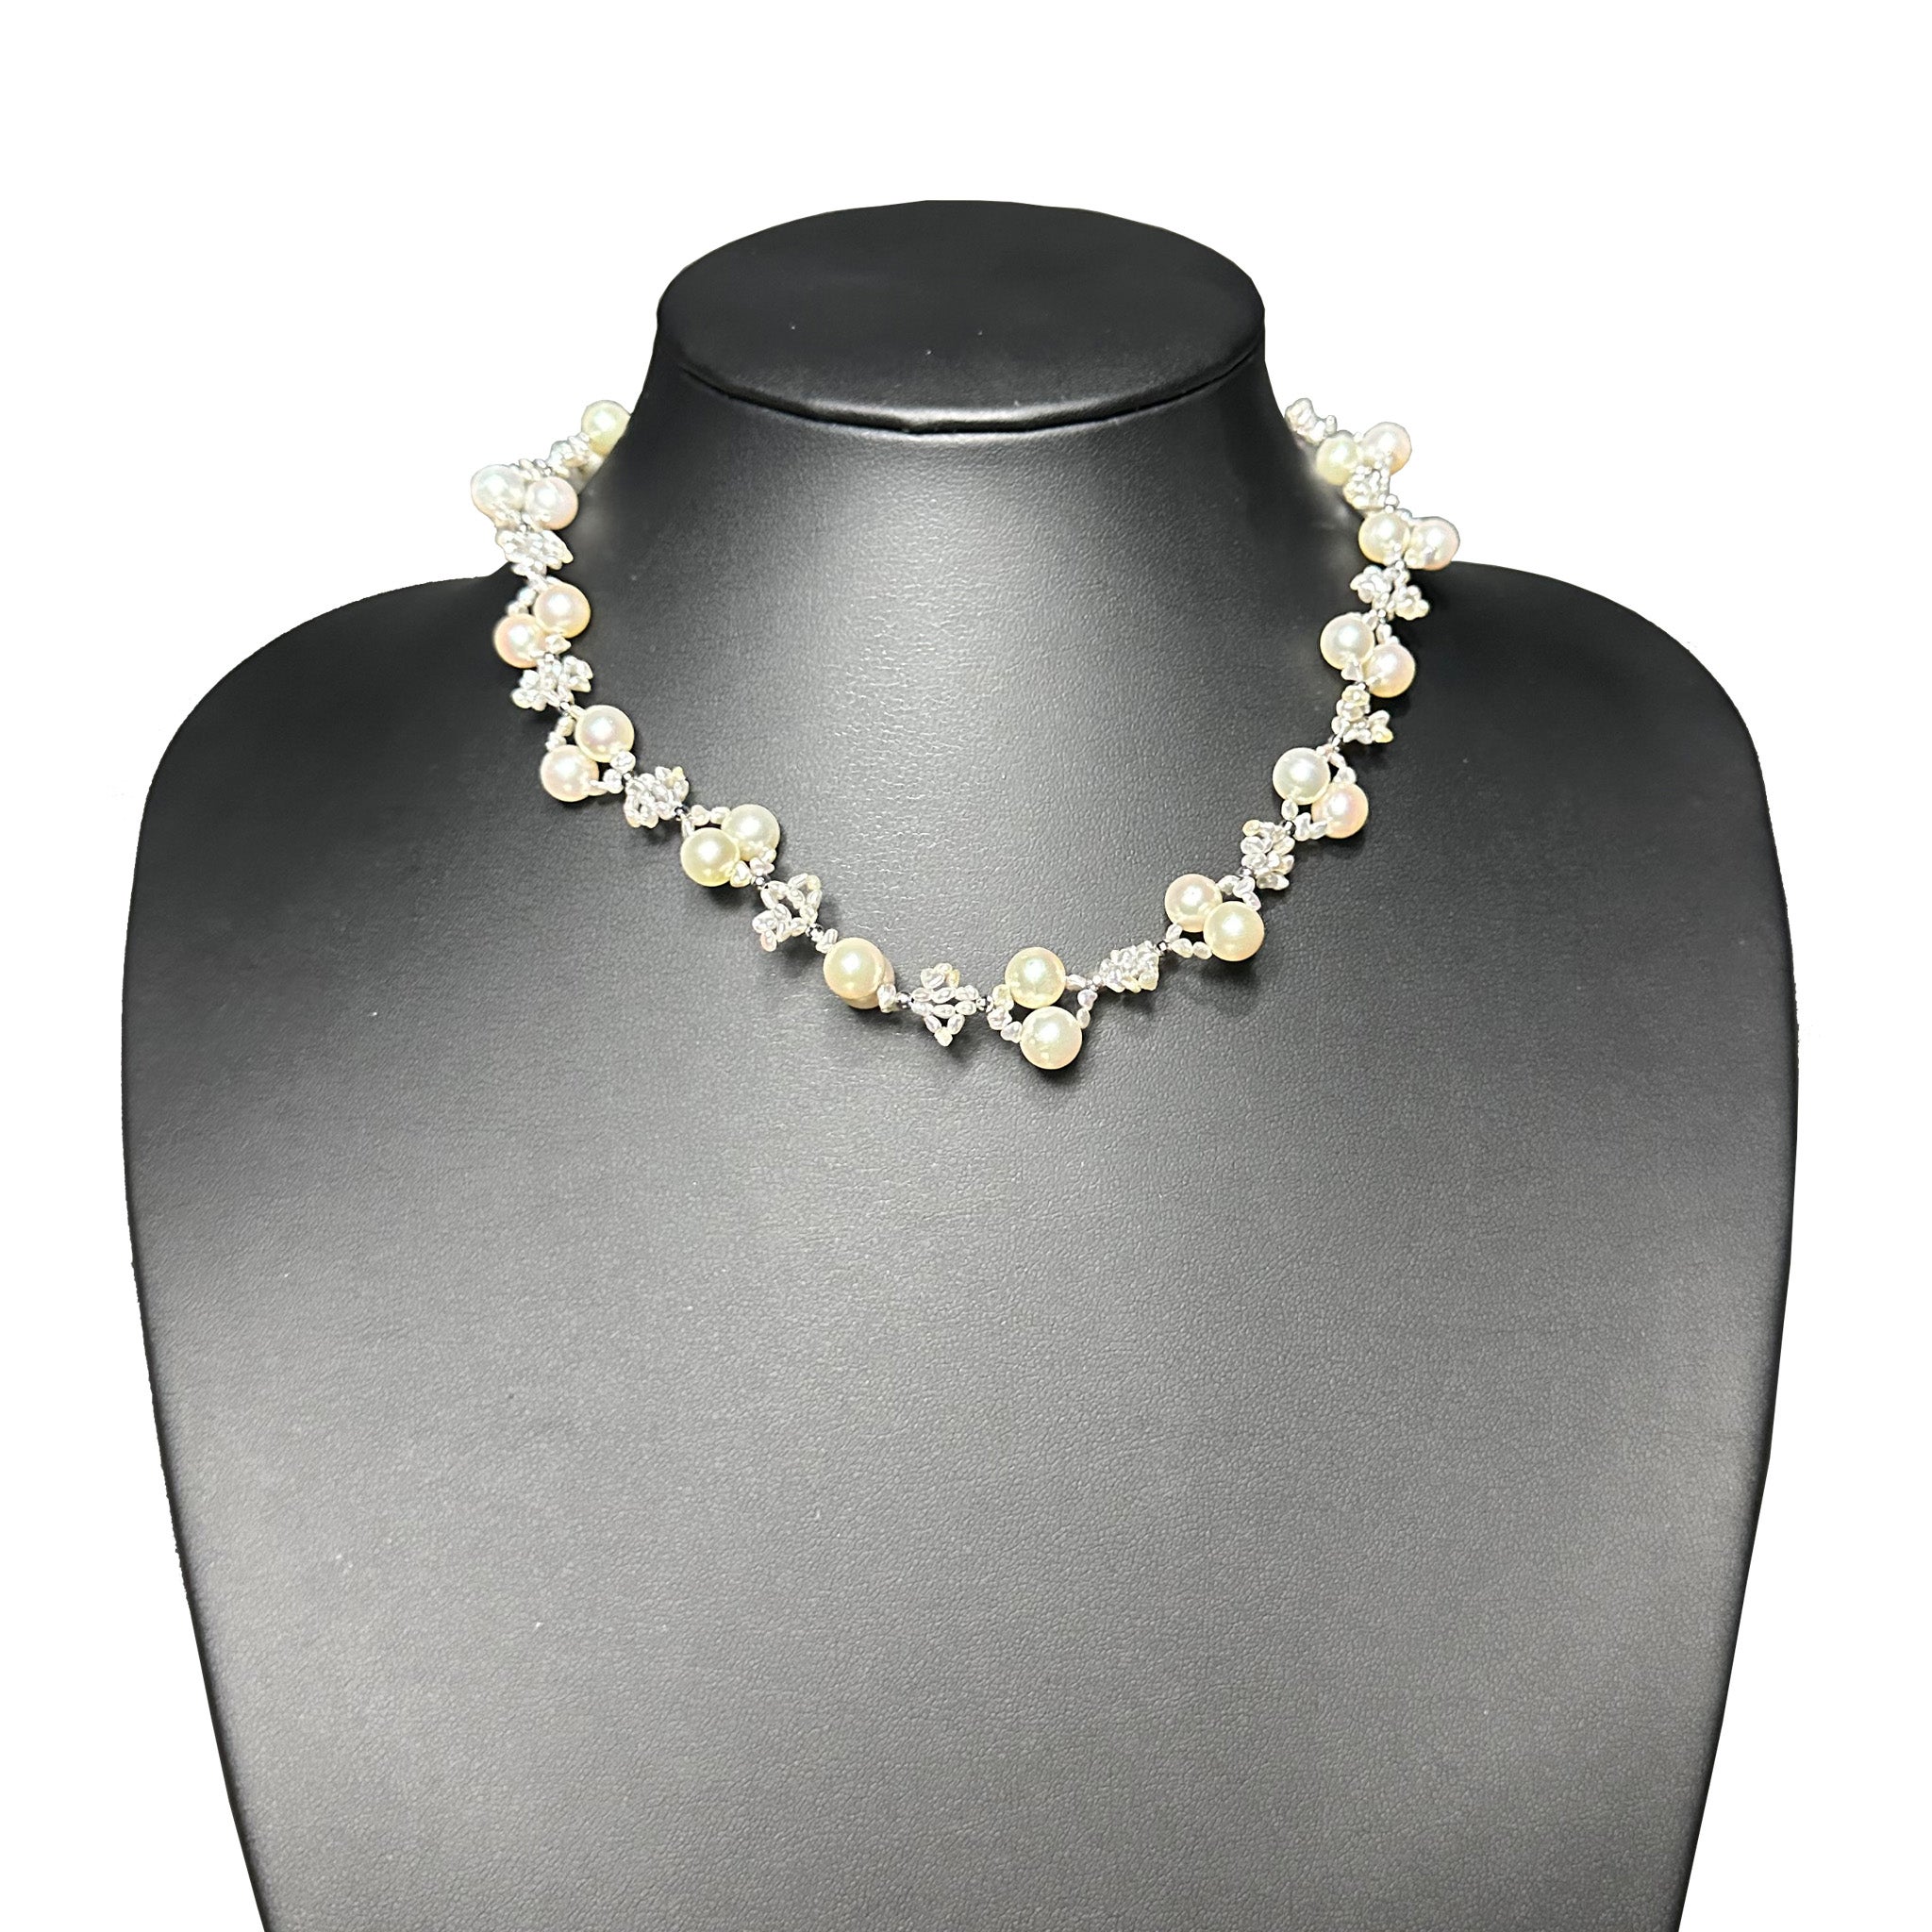 IRIS PARURE, Akoya Pearl 7.00-7.50mm Necklace, Non Colored & Non Bleached Pearl